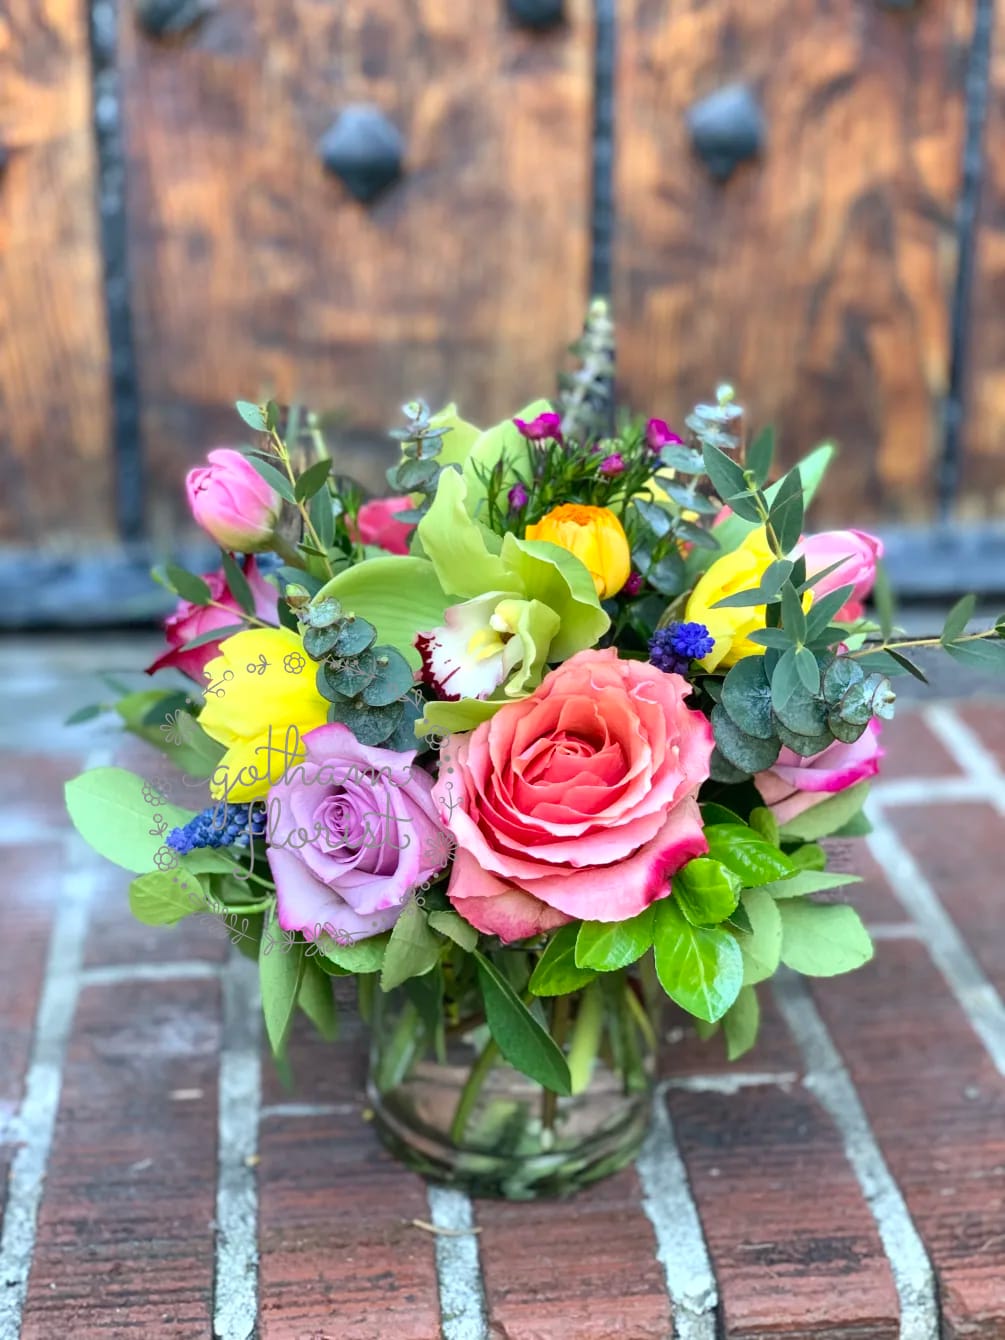 Rainbow Brite - A perfect thank you gift.  A bright mix of seasonal flowers in red, blue, yellow, orange, purple and greens. Flowers may vary as this is a designer's choice in a clear 3 inch vase.